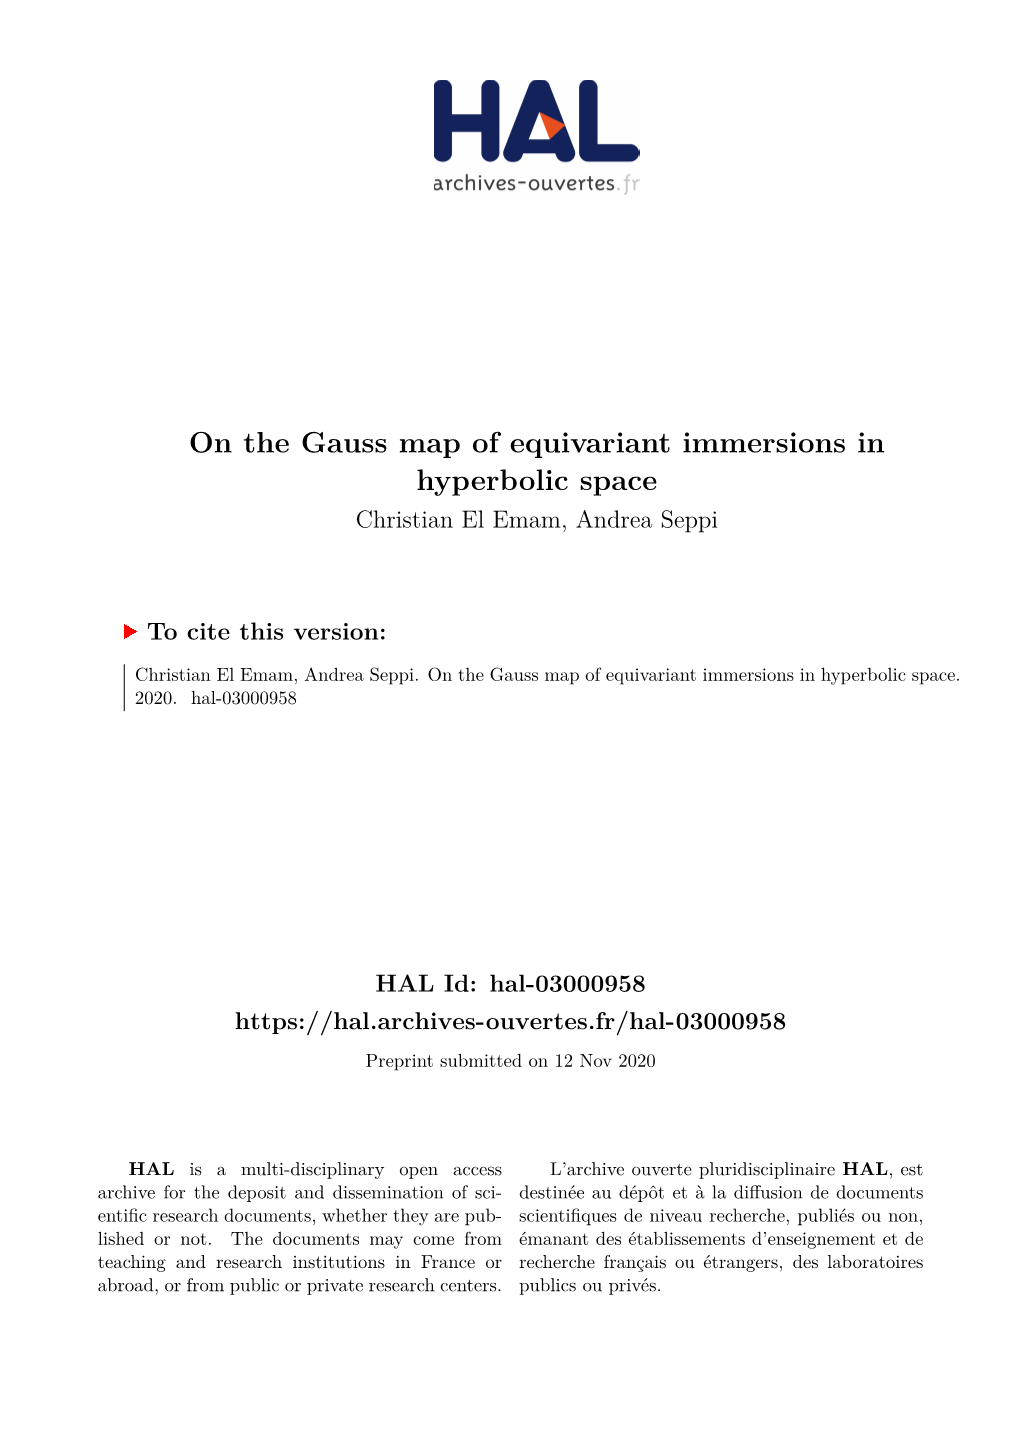 On the Gauss Map of Equivariant Immersions in Hyperbolic Space Christian El Emam, Andrea Seppi